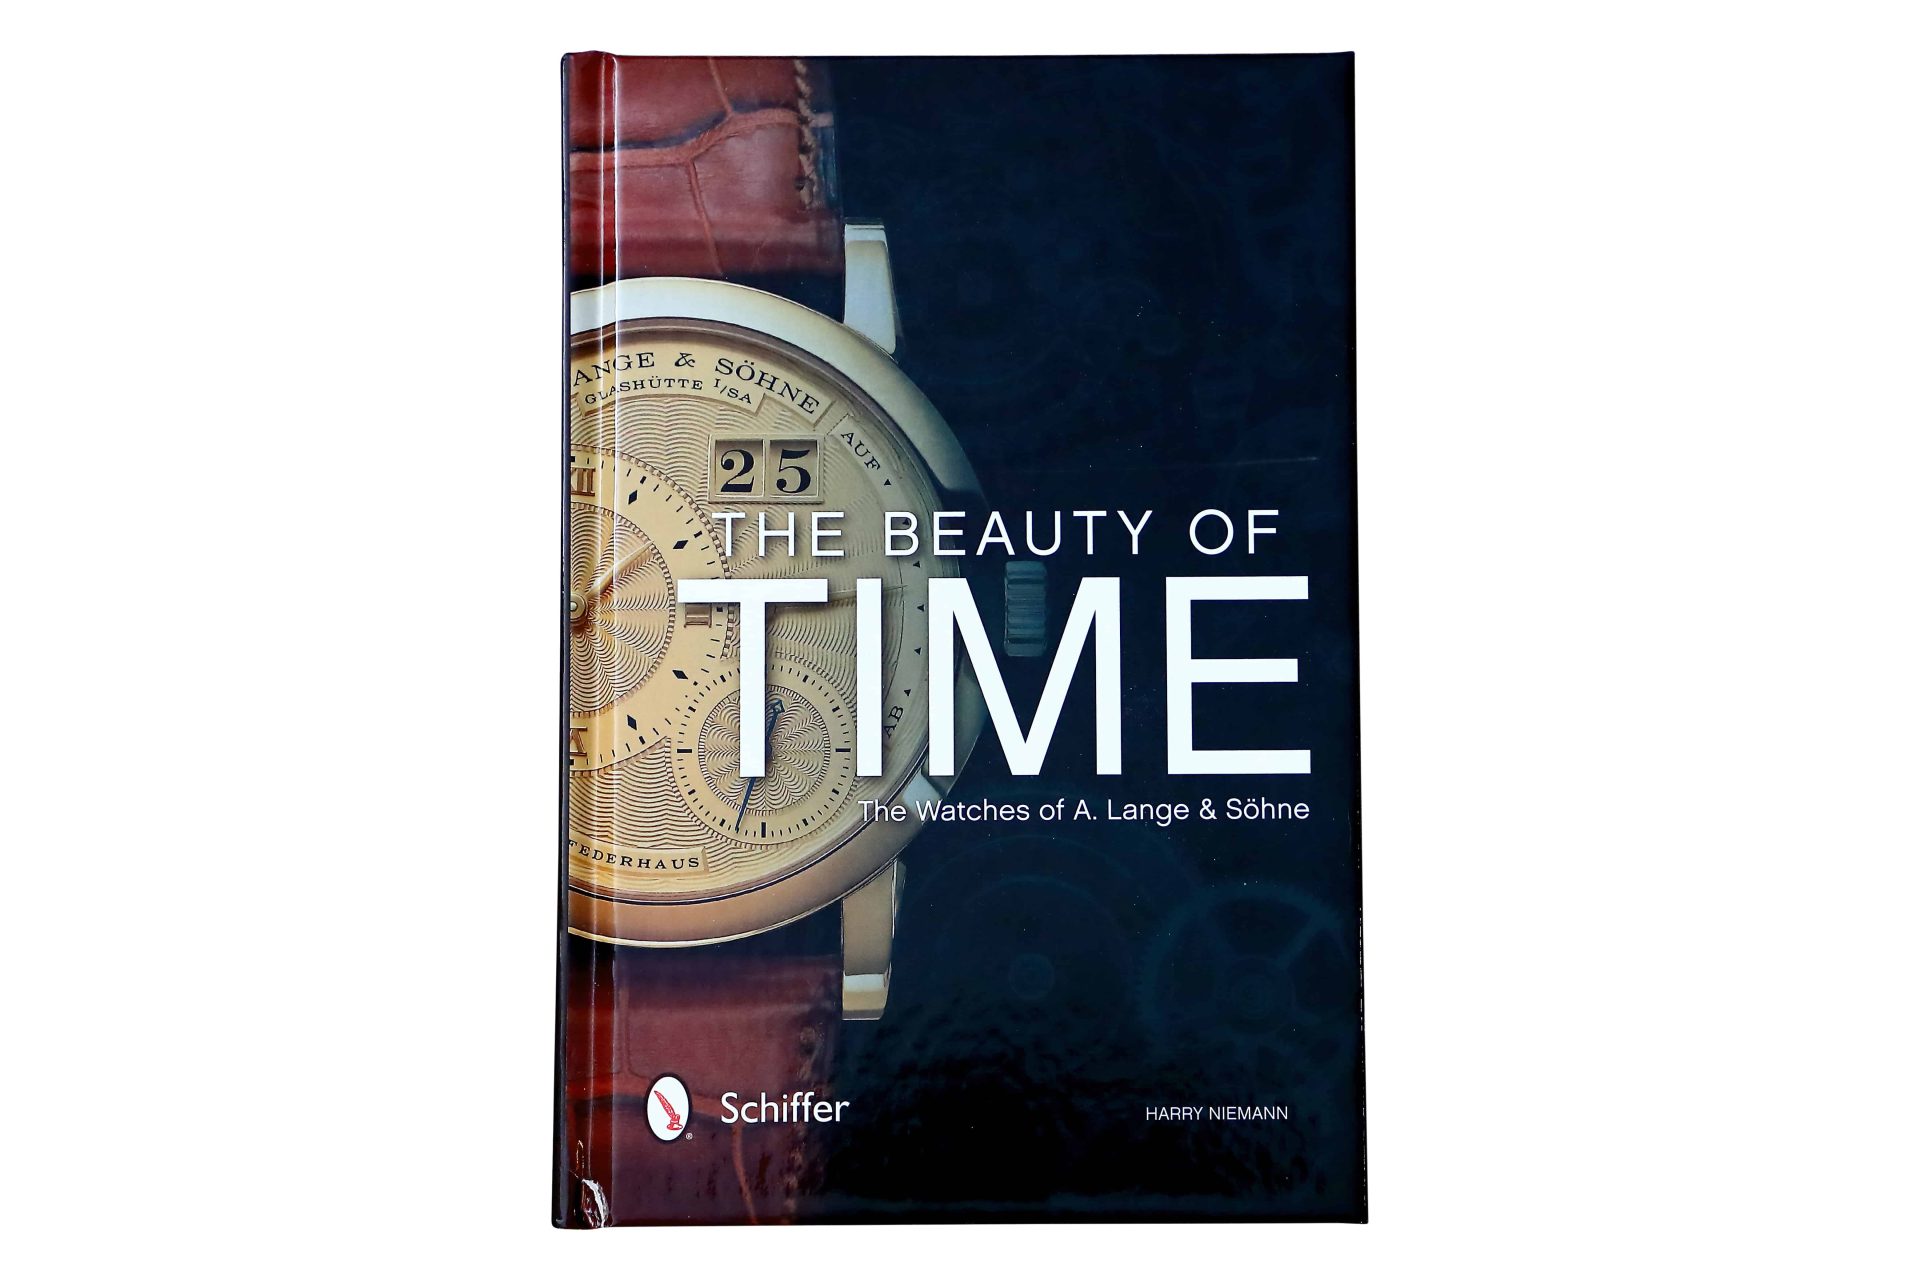 book on horology